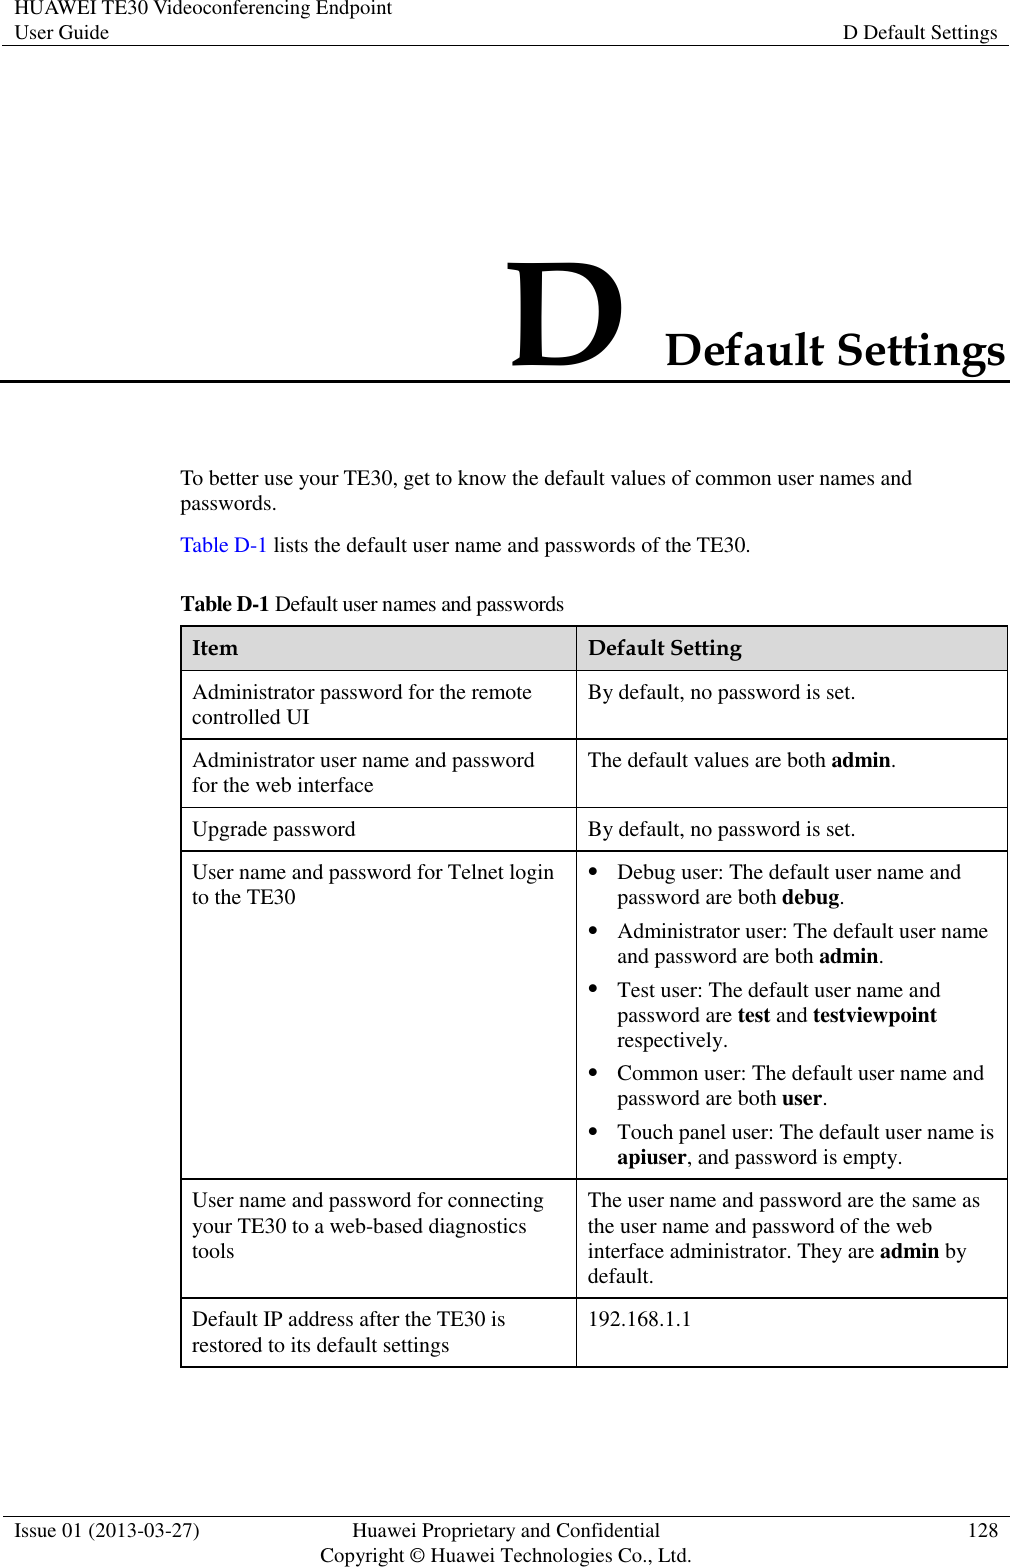 HUAWEI TE30 Videoconferencing Endpoint User Guide D Default Settings  Issue 01 (2013-03-27) Huawei Proprietary and Confidential                                     Copyright © Huawei Technologies Co., Ltd. 128  D Default Settings To better use your TE30, get to know the default values of common user names and passwords. Table D-1 lists the default user name and passwords of the TE30. Table D-1 Default user names and passwords Item Default Setting Administrator password for the remote controlled UI By default, no password is set. Administrator user name and password for the web interface The default values are both admin. Upgrade password By default, no password is set. User name and password for Telnet login to the TE30  Debug user: The default user name and password are both debug.  Administrator user: The default user name and password are both admin.  Test user: The default user name and password are test and testviewpoint respectively.  Common user: The default user name and password are both user.  Touch panel user: The default user name is apiuser, and password is empty. User name and password for connecting your TE30 to a web-based diagnostics tools The user name and password are the same as the user name and password of the web interface administrator. They are admin by default.   Default IP address after the TE30 is restored to its default settings 192.168.1.1 